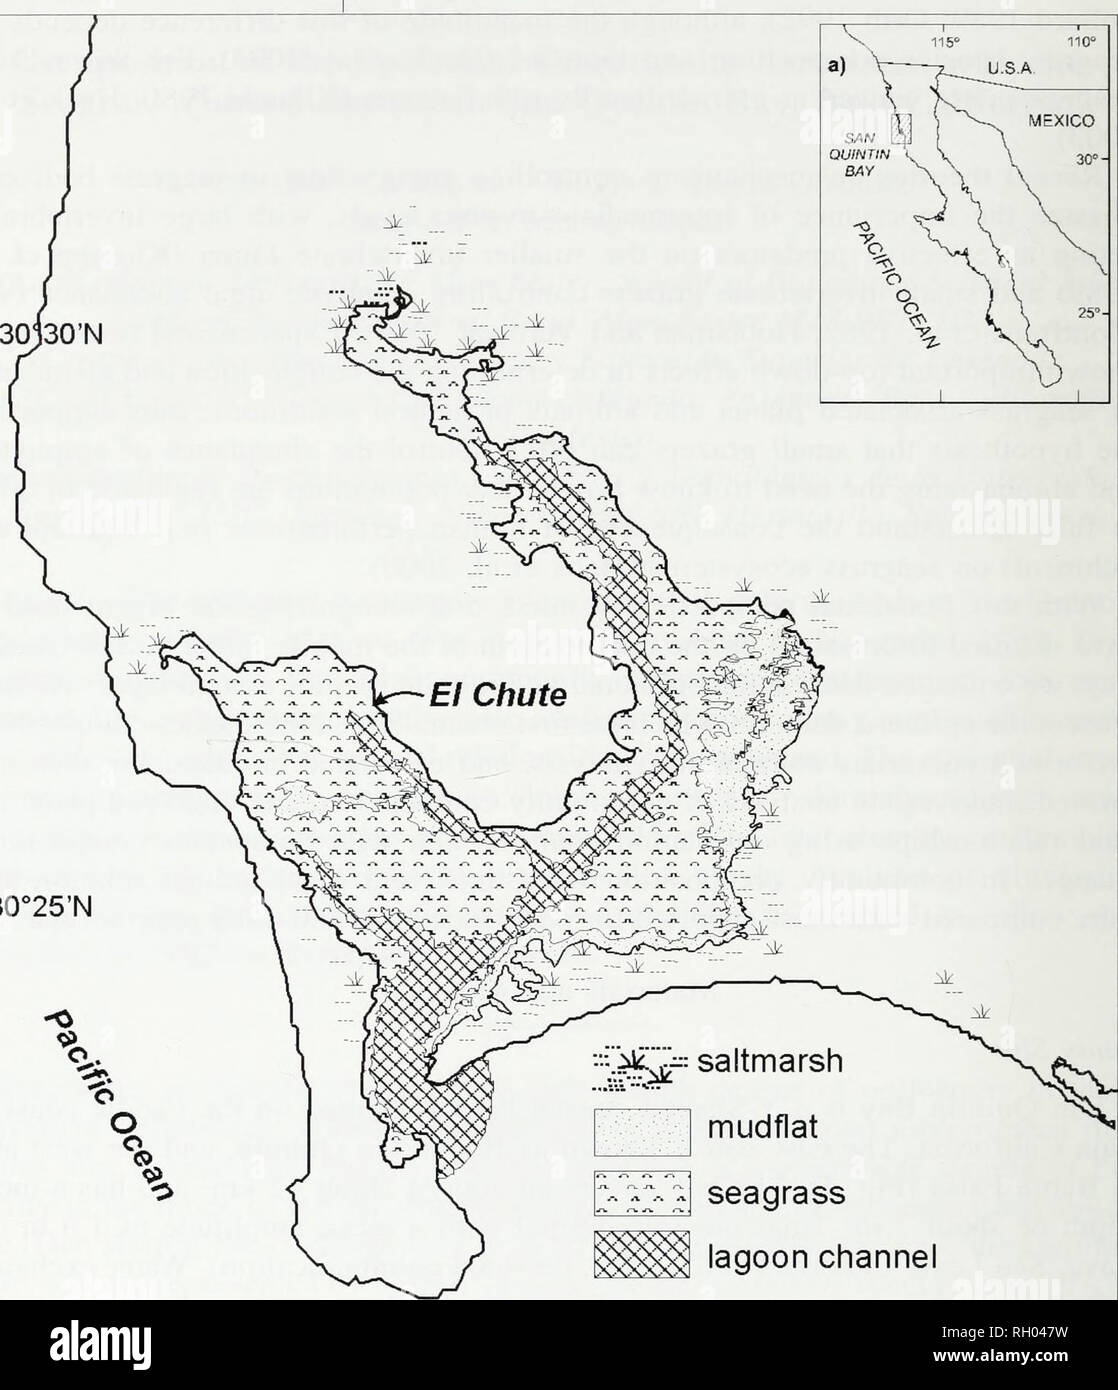 . Bulletin. Science. 102 SOUTHERN CALIFORNIA ACADEMY OF SCIENCES. 30°25'N seagrass 3 lagoon channel 10 Km 30°20'N 116°00'W 115°55W Fig. 1. Location of the sampled area inside San Quintin Bay, Baja California, Mexico (modified from Ibarra-Obando et al. 2004). Reish 1963; Barnard 1964; Cook 1974; Calderon-Aguilera and Jorajuira-Corbo 1986; Bretado-Aguirre 1987; Cantu-Martinez 1987; Griffis and Chavez 1988; Dfaz-Castaneda and Rodriguez-Villanueva 1998), and at the community level (Barnard 1970; Calderon-Aguilera 1992; Sinicrope-Talley et al. 2000). Environ- mental conditions that play a role with Stock Photo